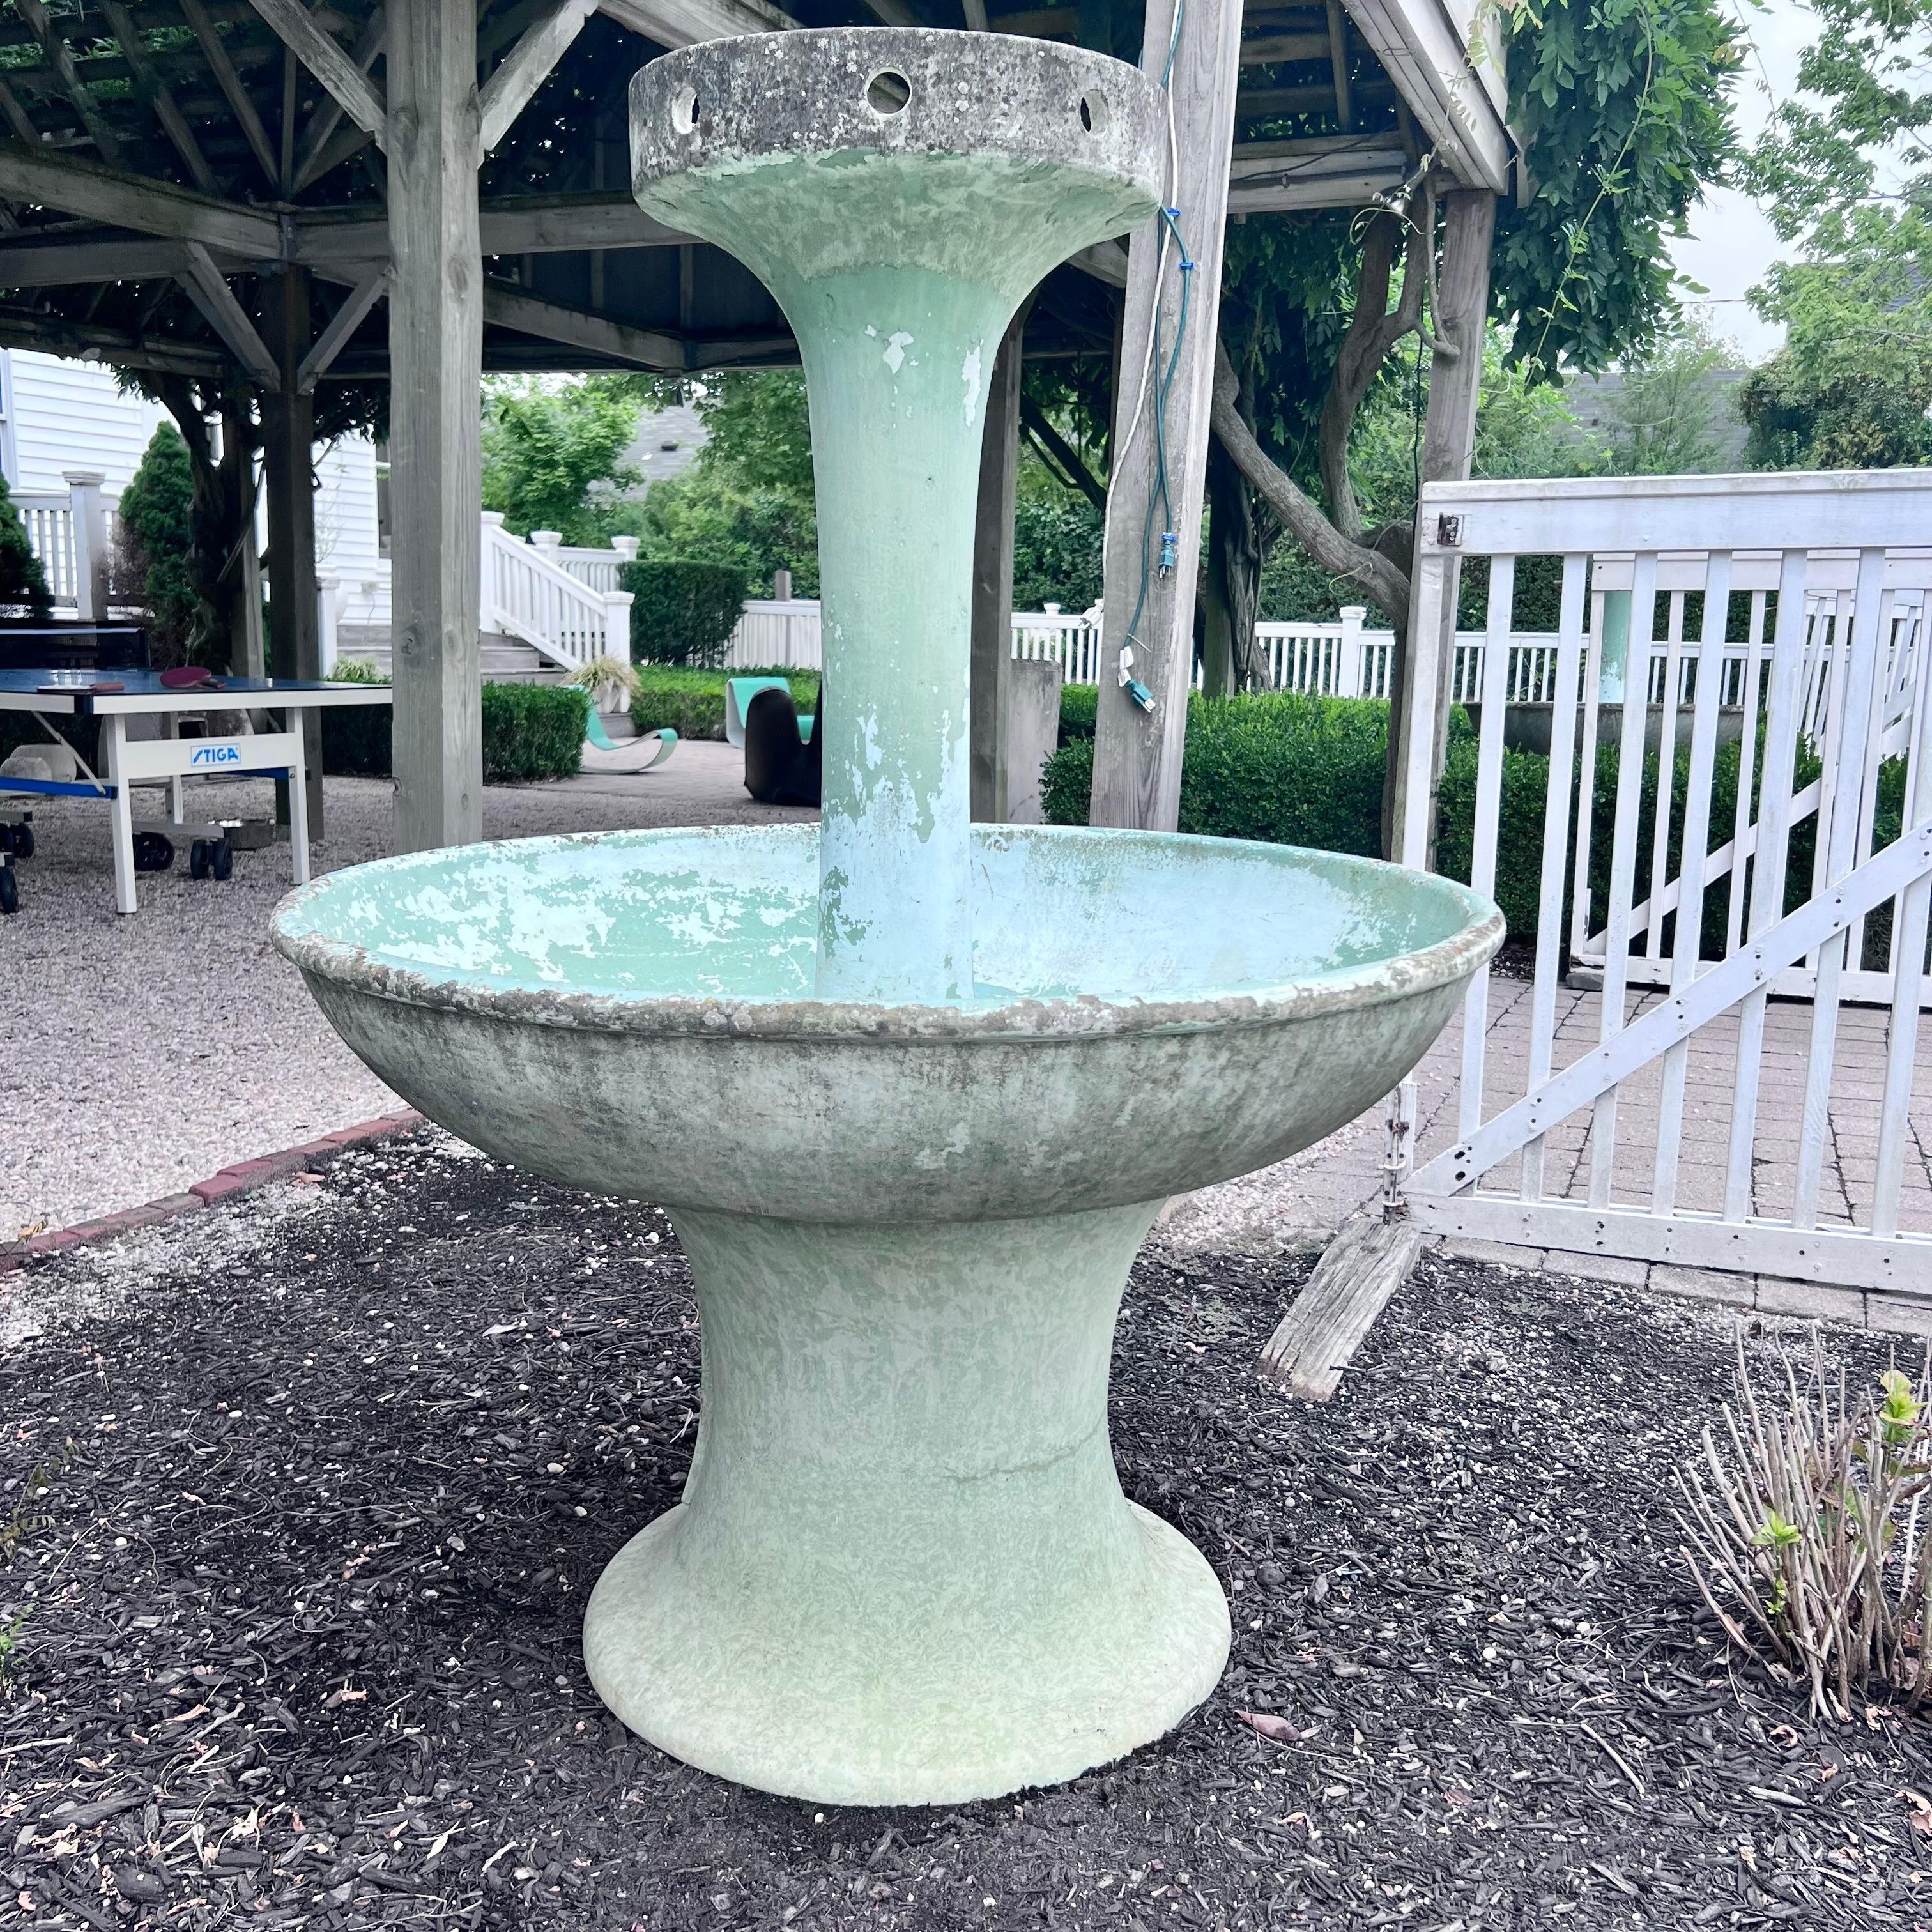 Rare concrete fountains made in Belgium. Dated March 22, 1948. Three-piece fountain with large concave base supporting massive basin and topped with a tall slender spout. Great patina and age to concrete. Factory drilled holes for water and